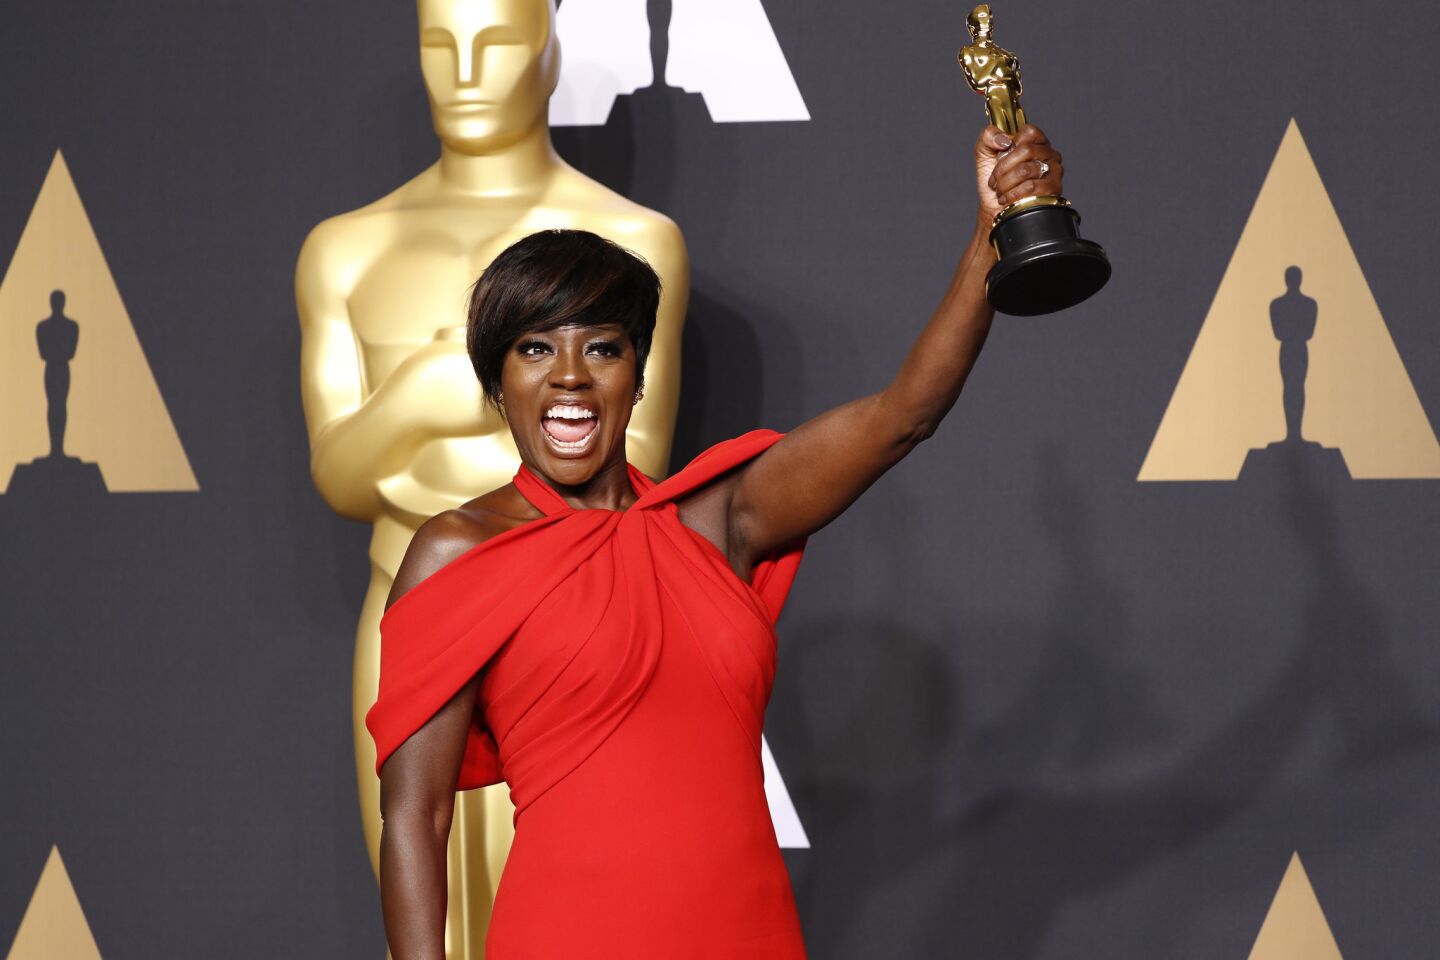 "Fences" star Viola Davis hoists her award for supporting actress backstage in the photo room at the 89th Academy Awards on Feb. 26 at the Dolby Theatre in Hollywood.